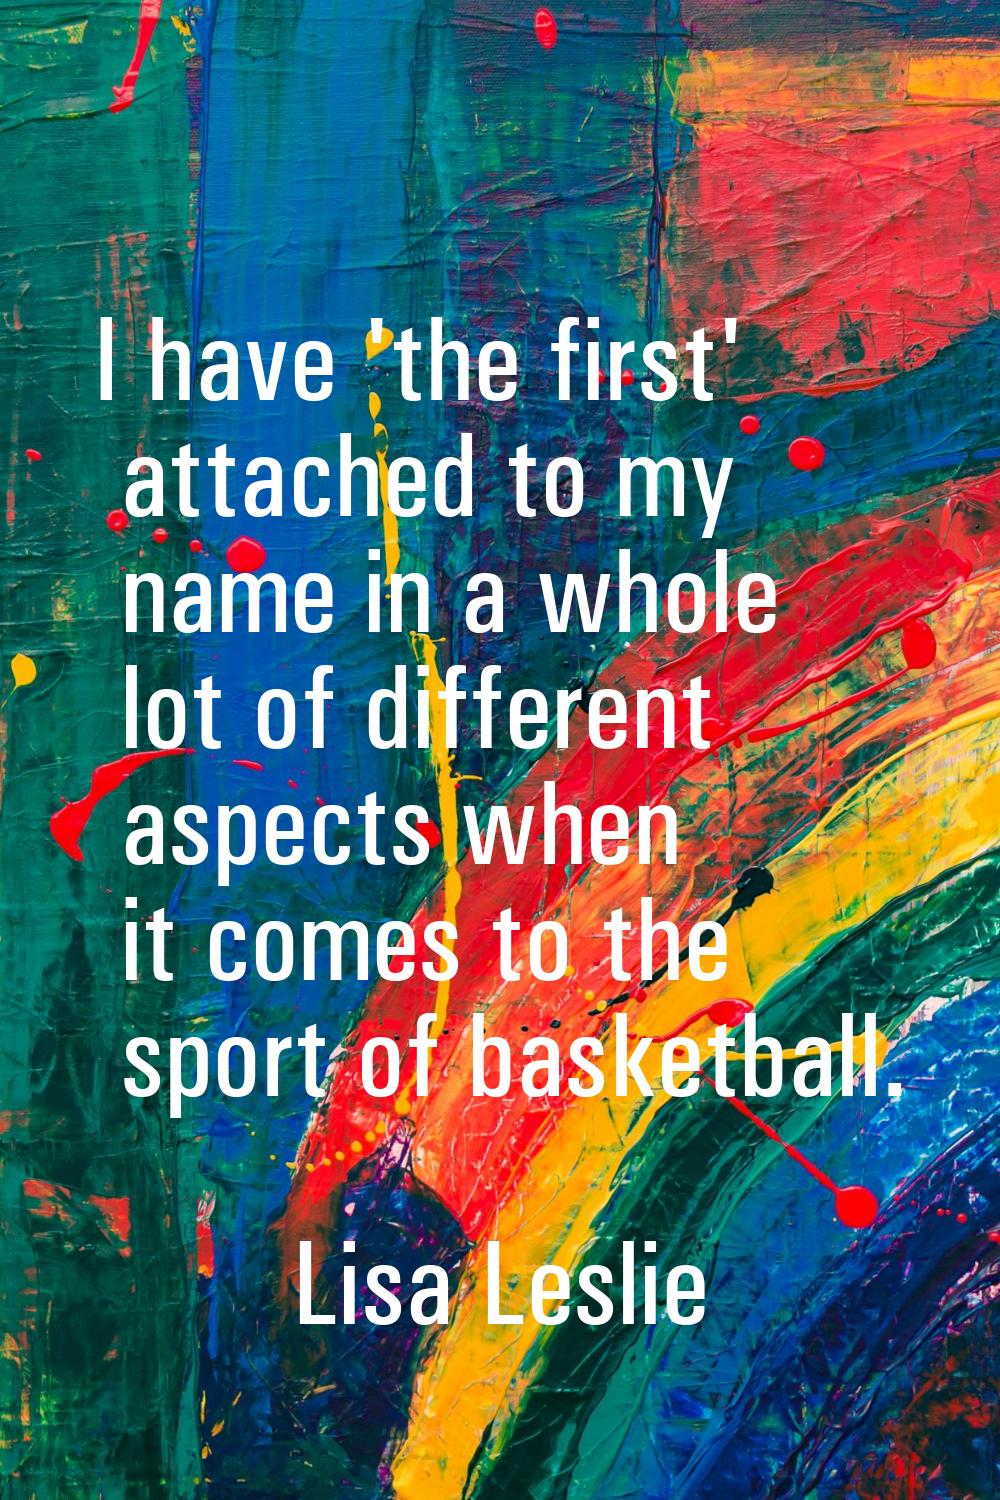 I have 'the first' attached to my name in a whole lot of different aspects when it comes to the spo